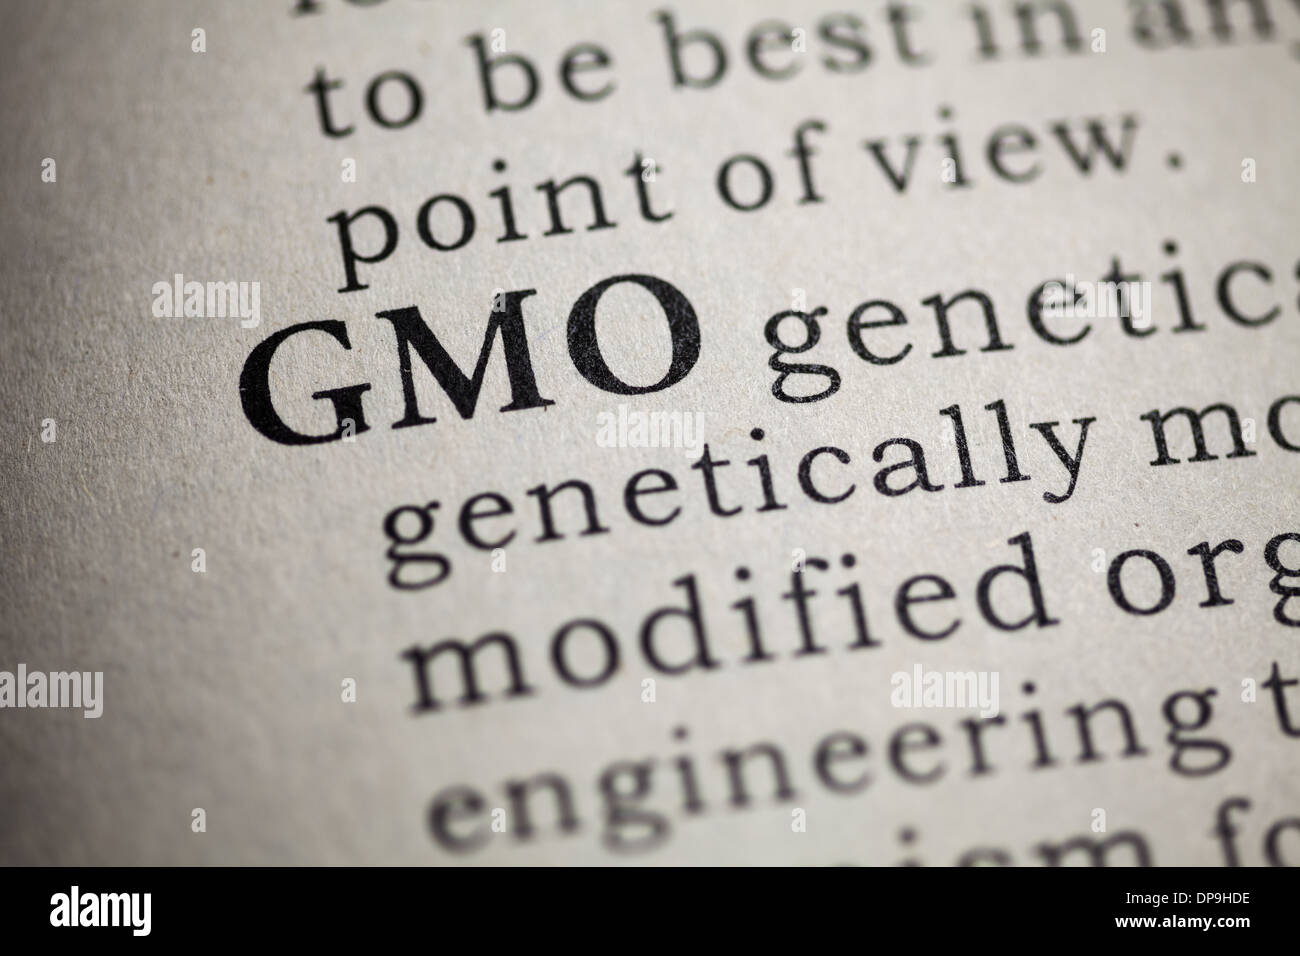 Fake Dictionary, Dictionary definition of the word genetically modified organism. Stock Photo